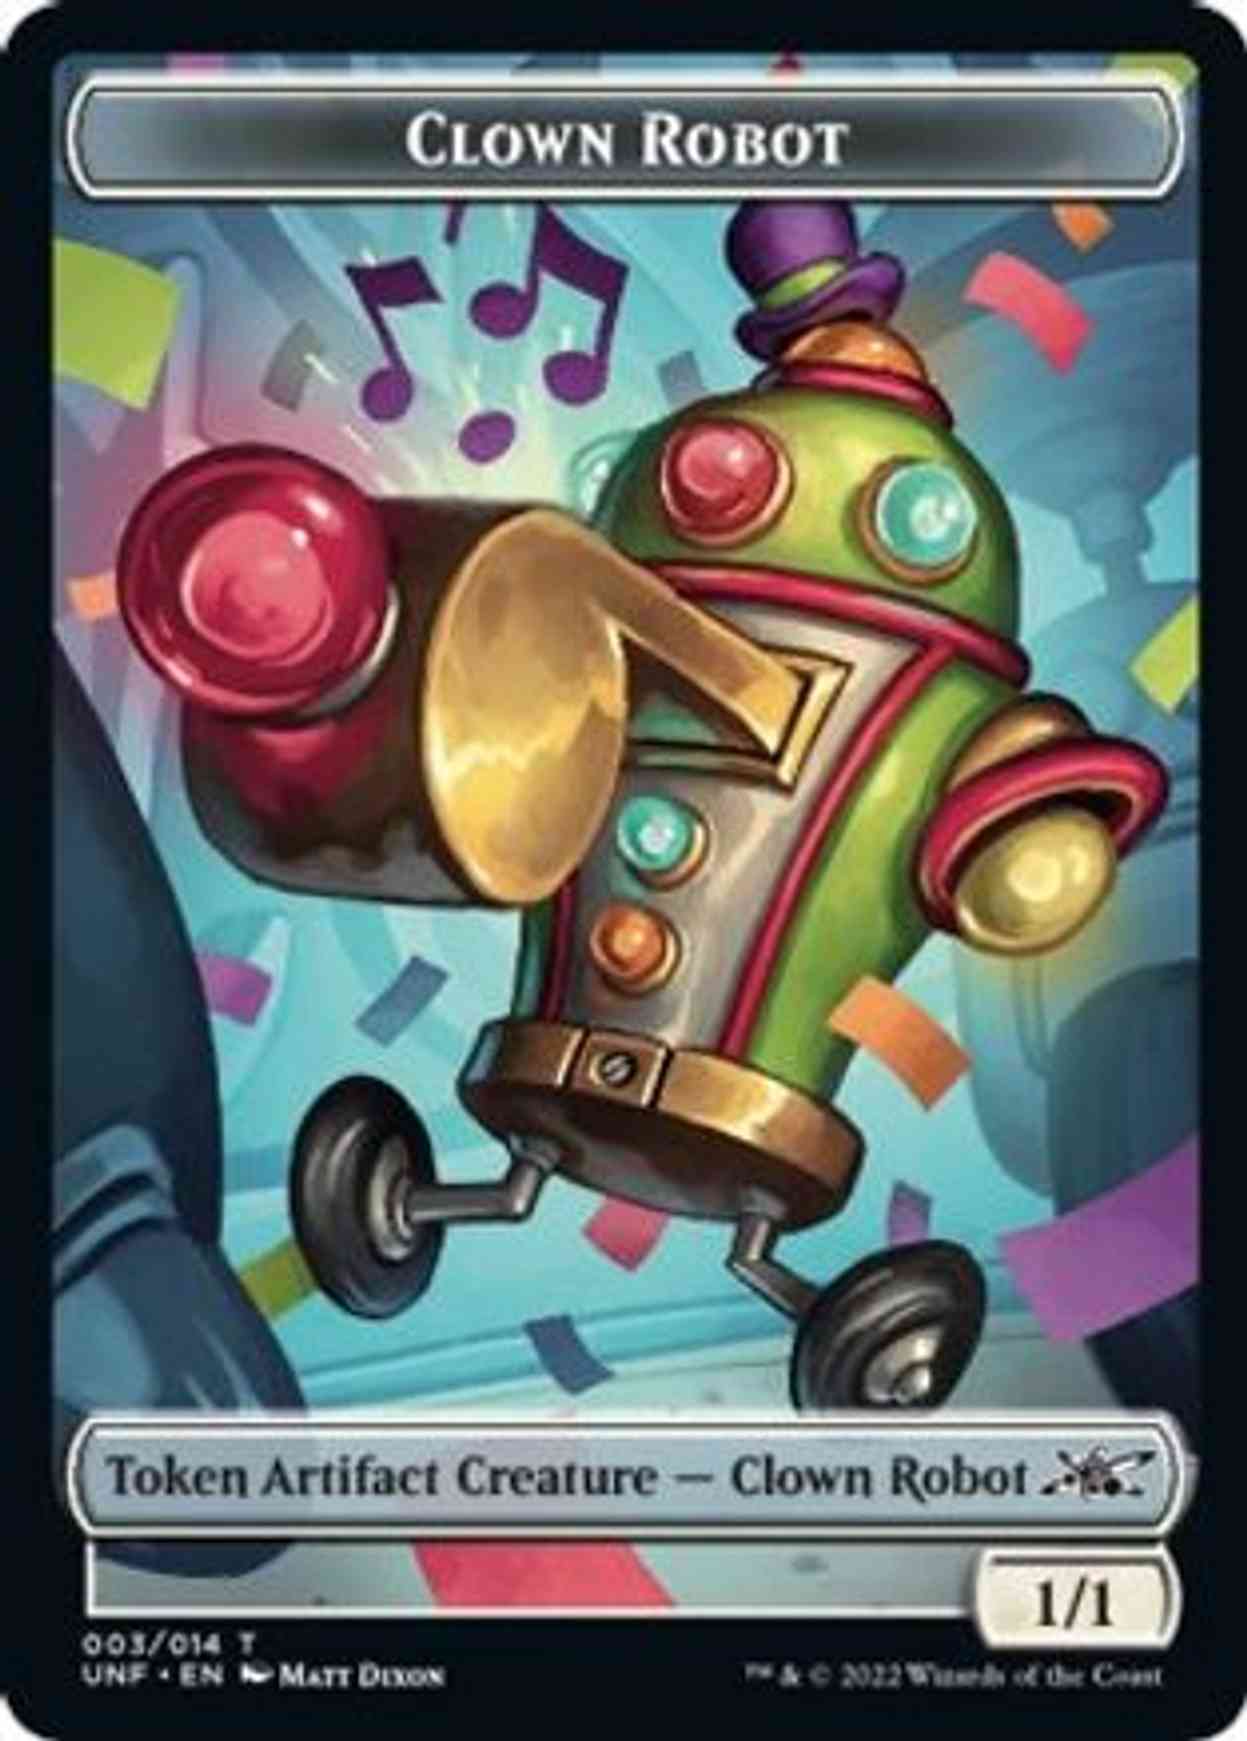 Clown Robot (003) // Food (011) Double-sided Token magic card front